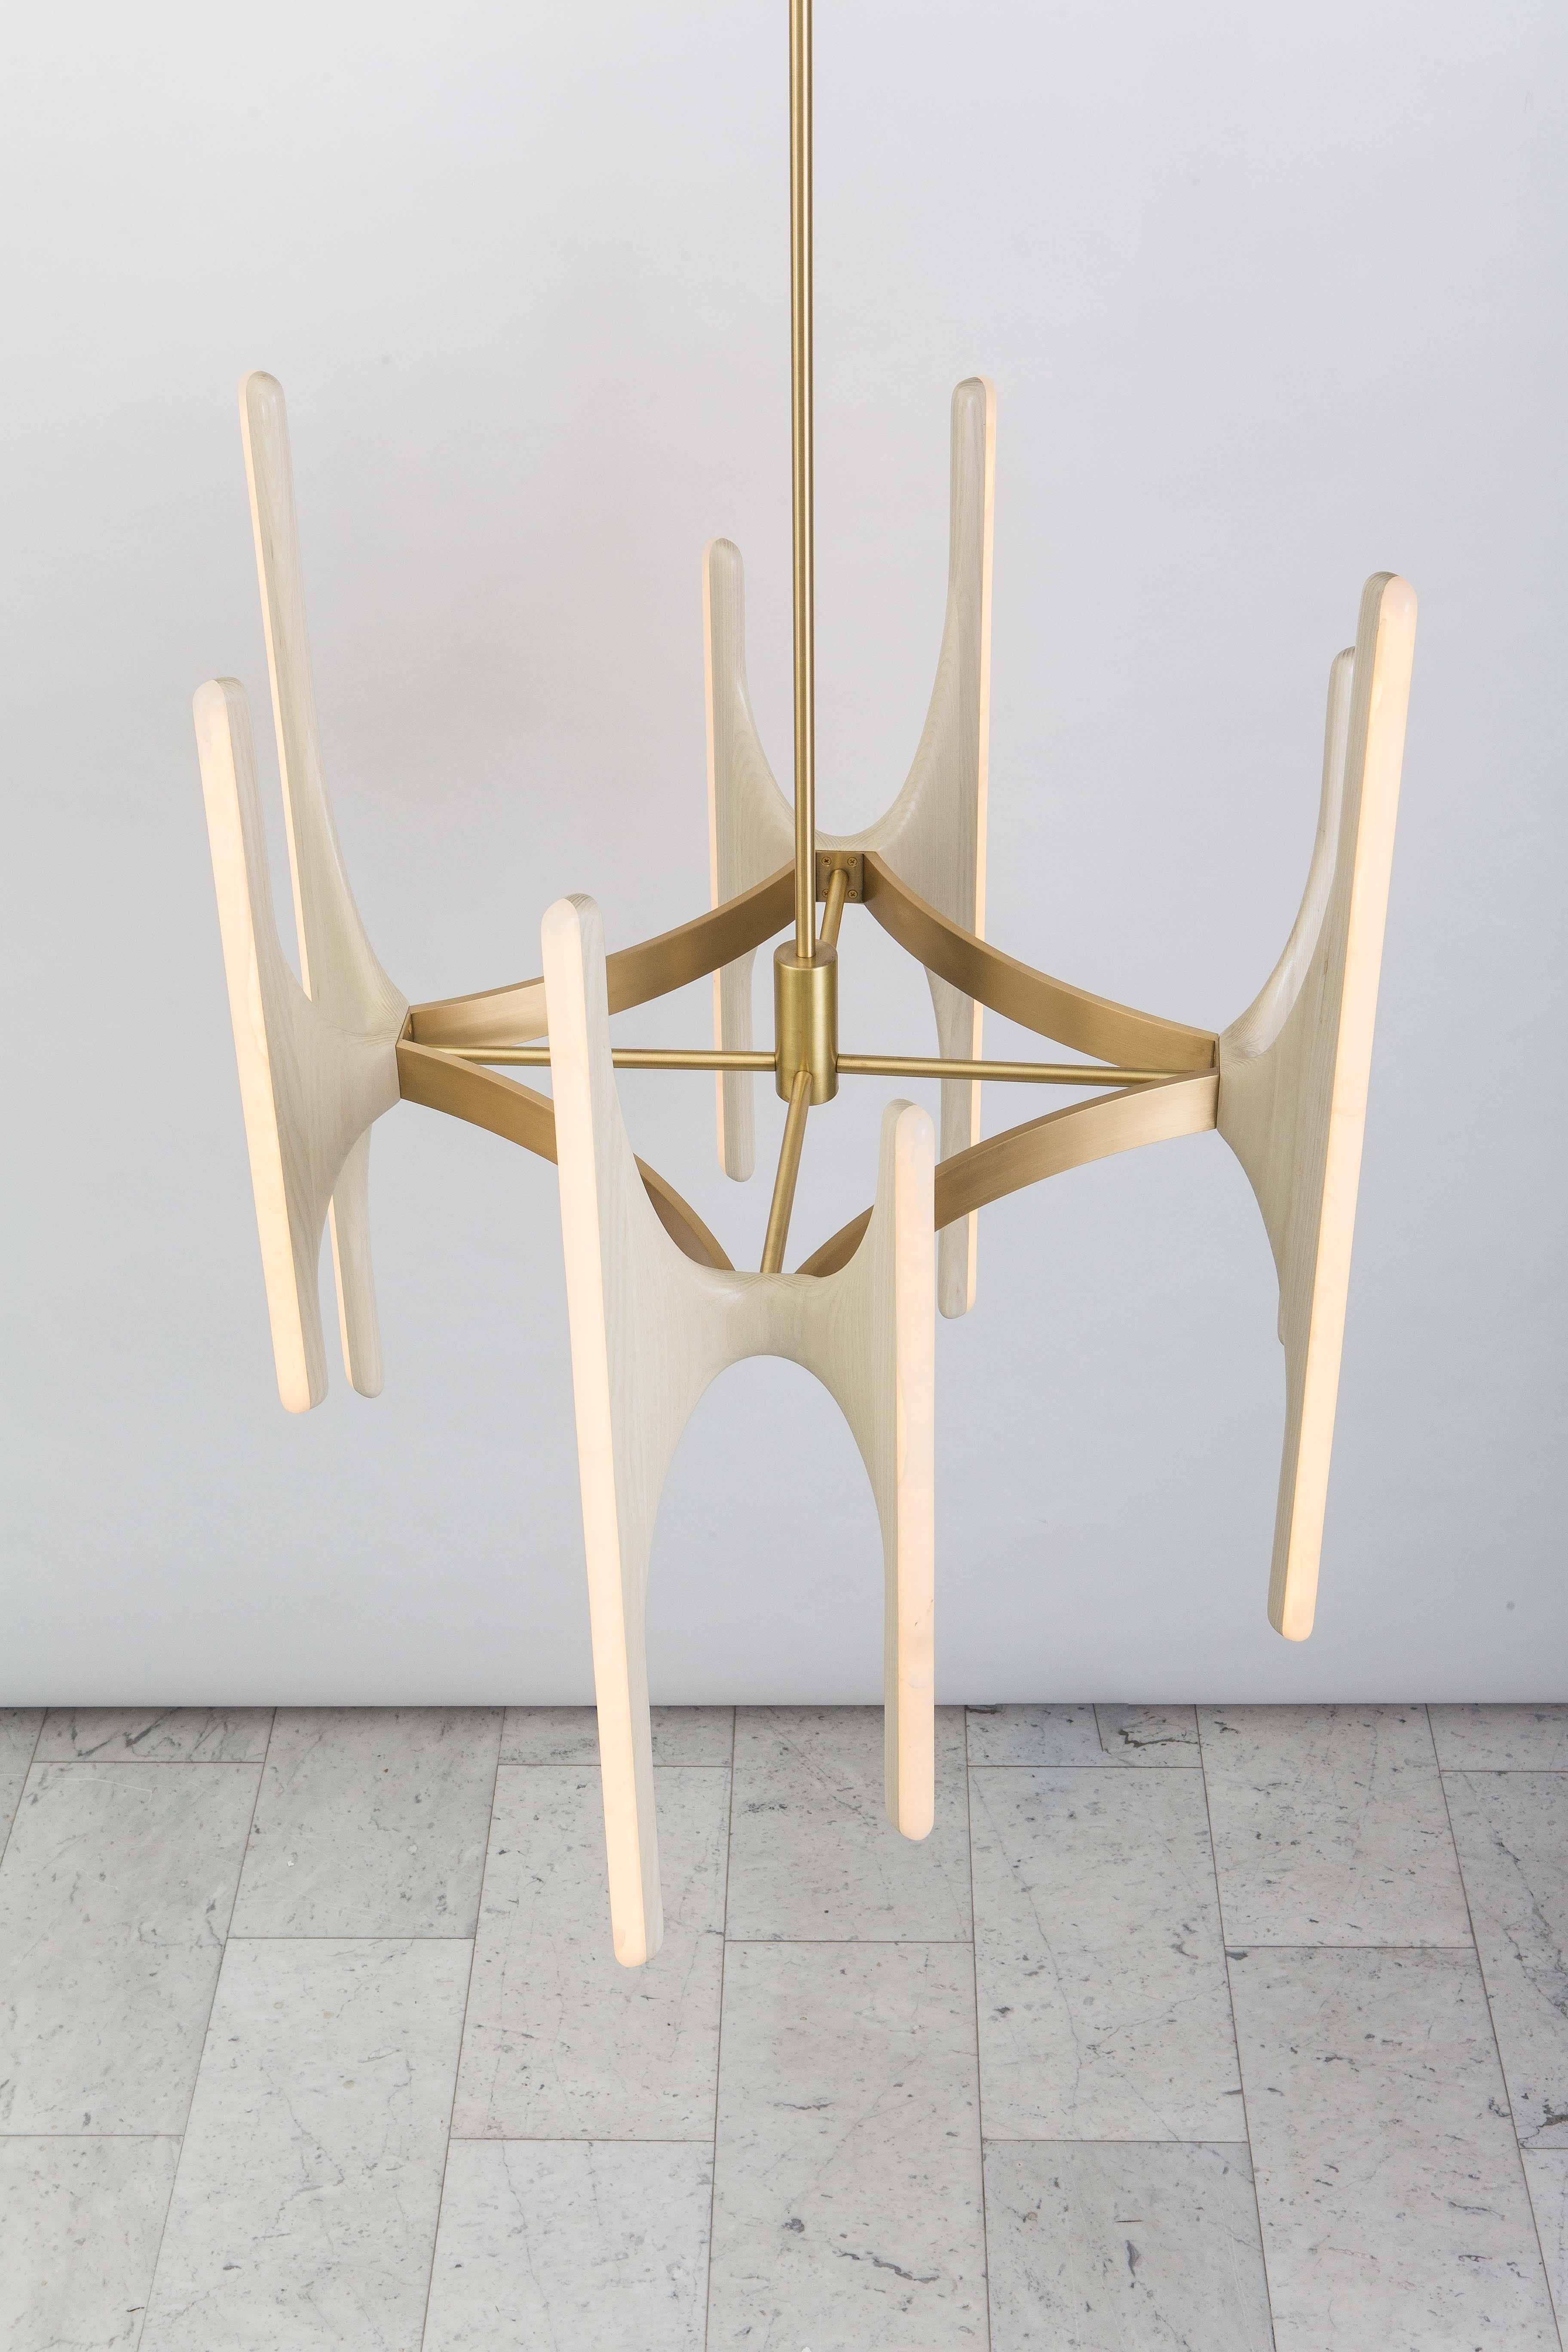 Inspired by nature and the human form, Haase’s custom chandelier is composed of hand-sculpted bleached ash “branches” imbedded with hand-carved white onyx that encase dimmable LEDs. Suspended upon a diamond-form satin-finish brass center structure,